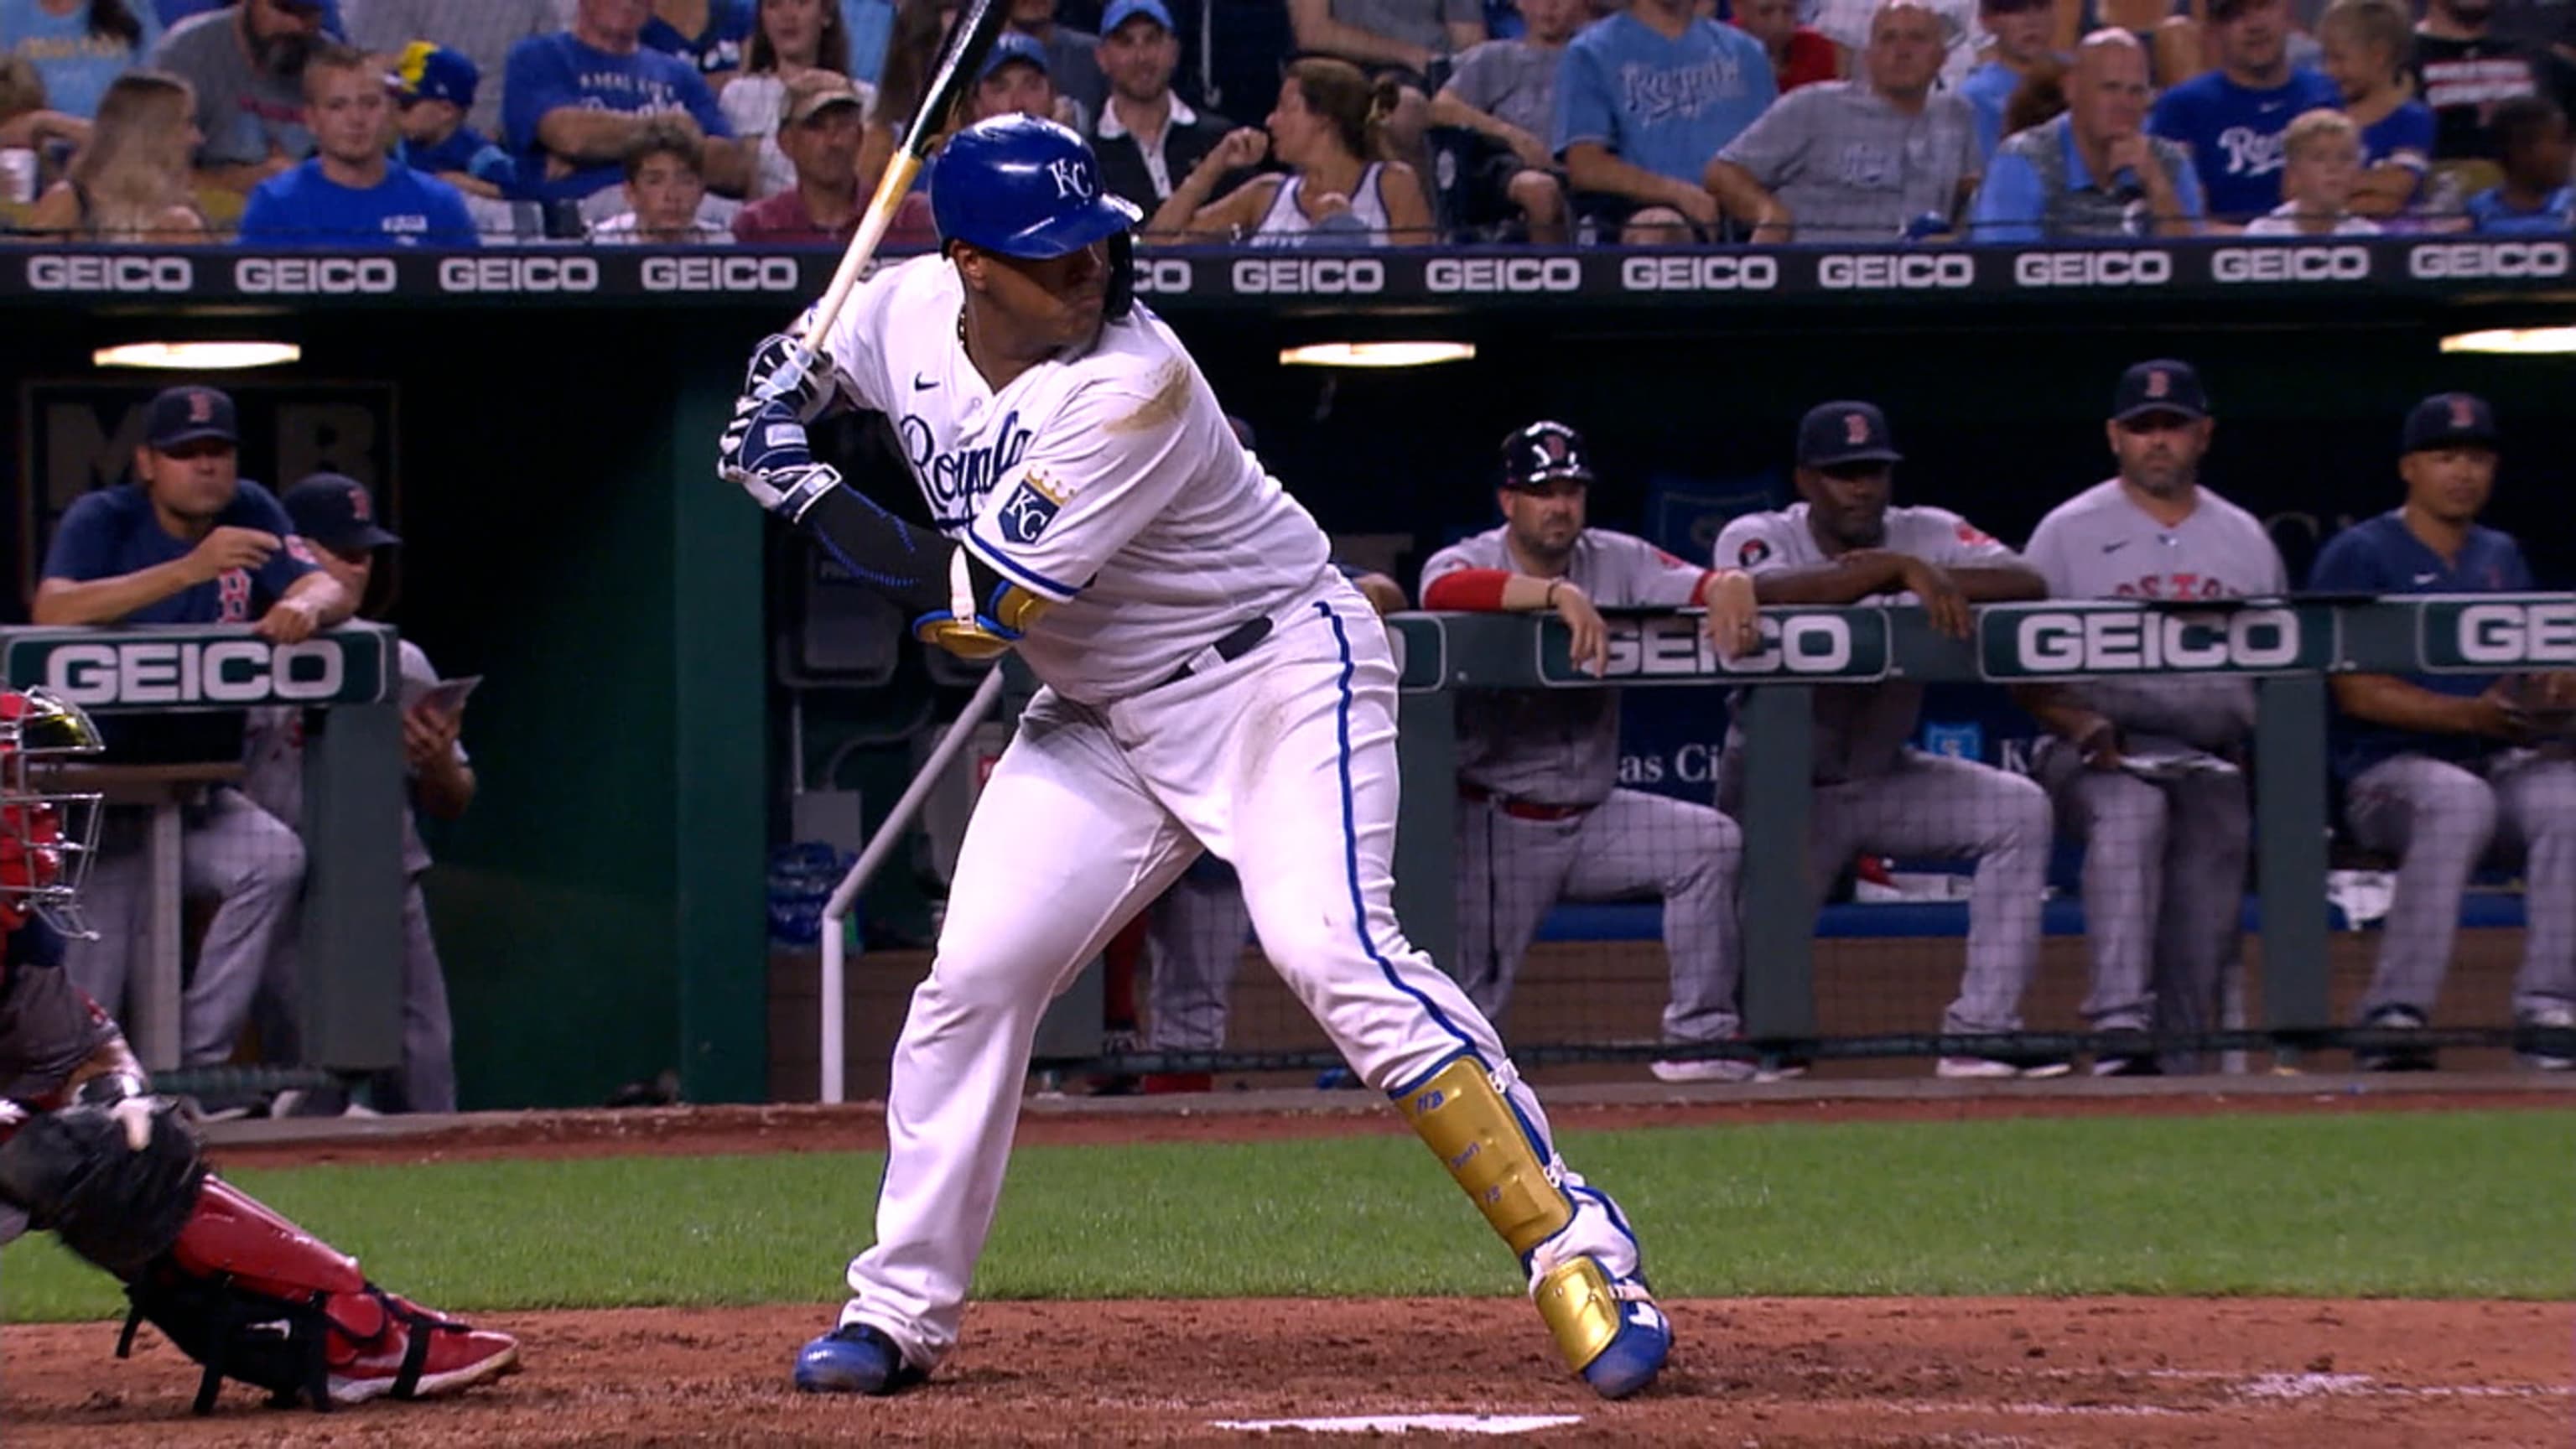 Put Salvador Perez in the Home Run Derby! - Royals Review